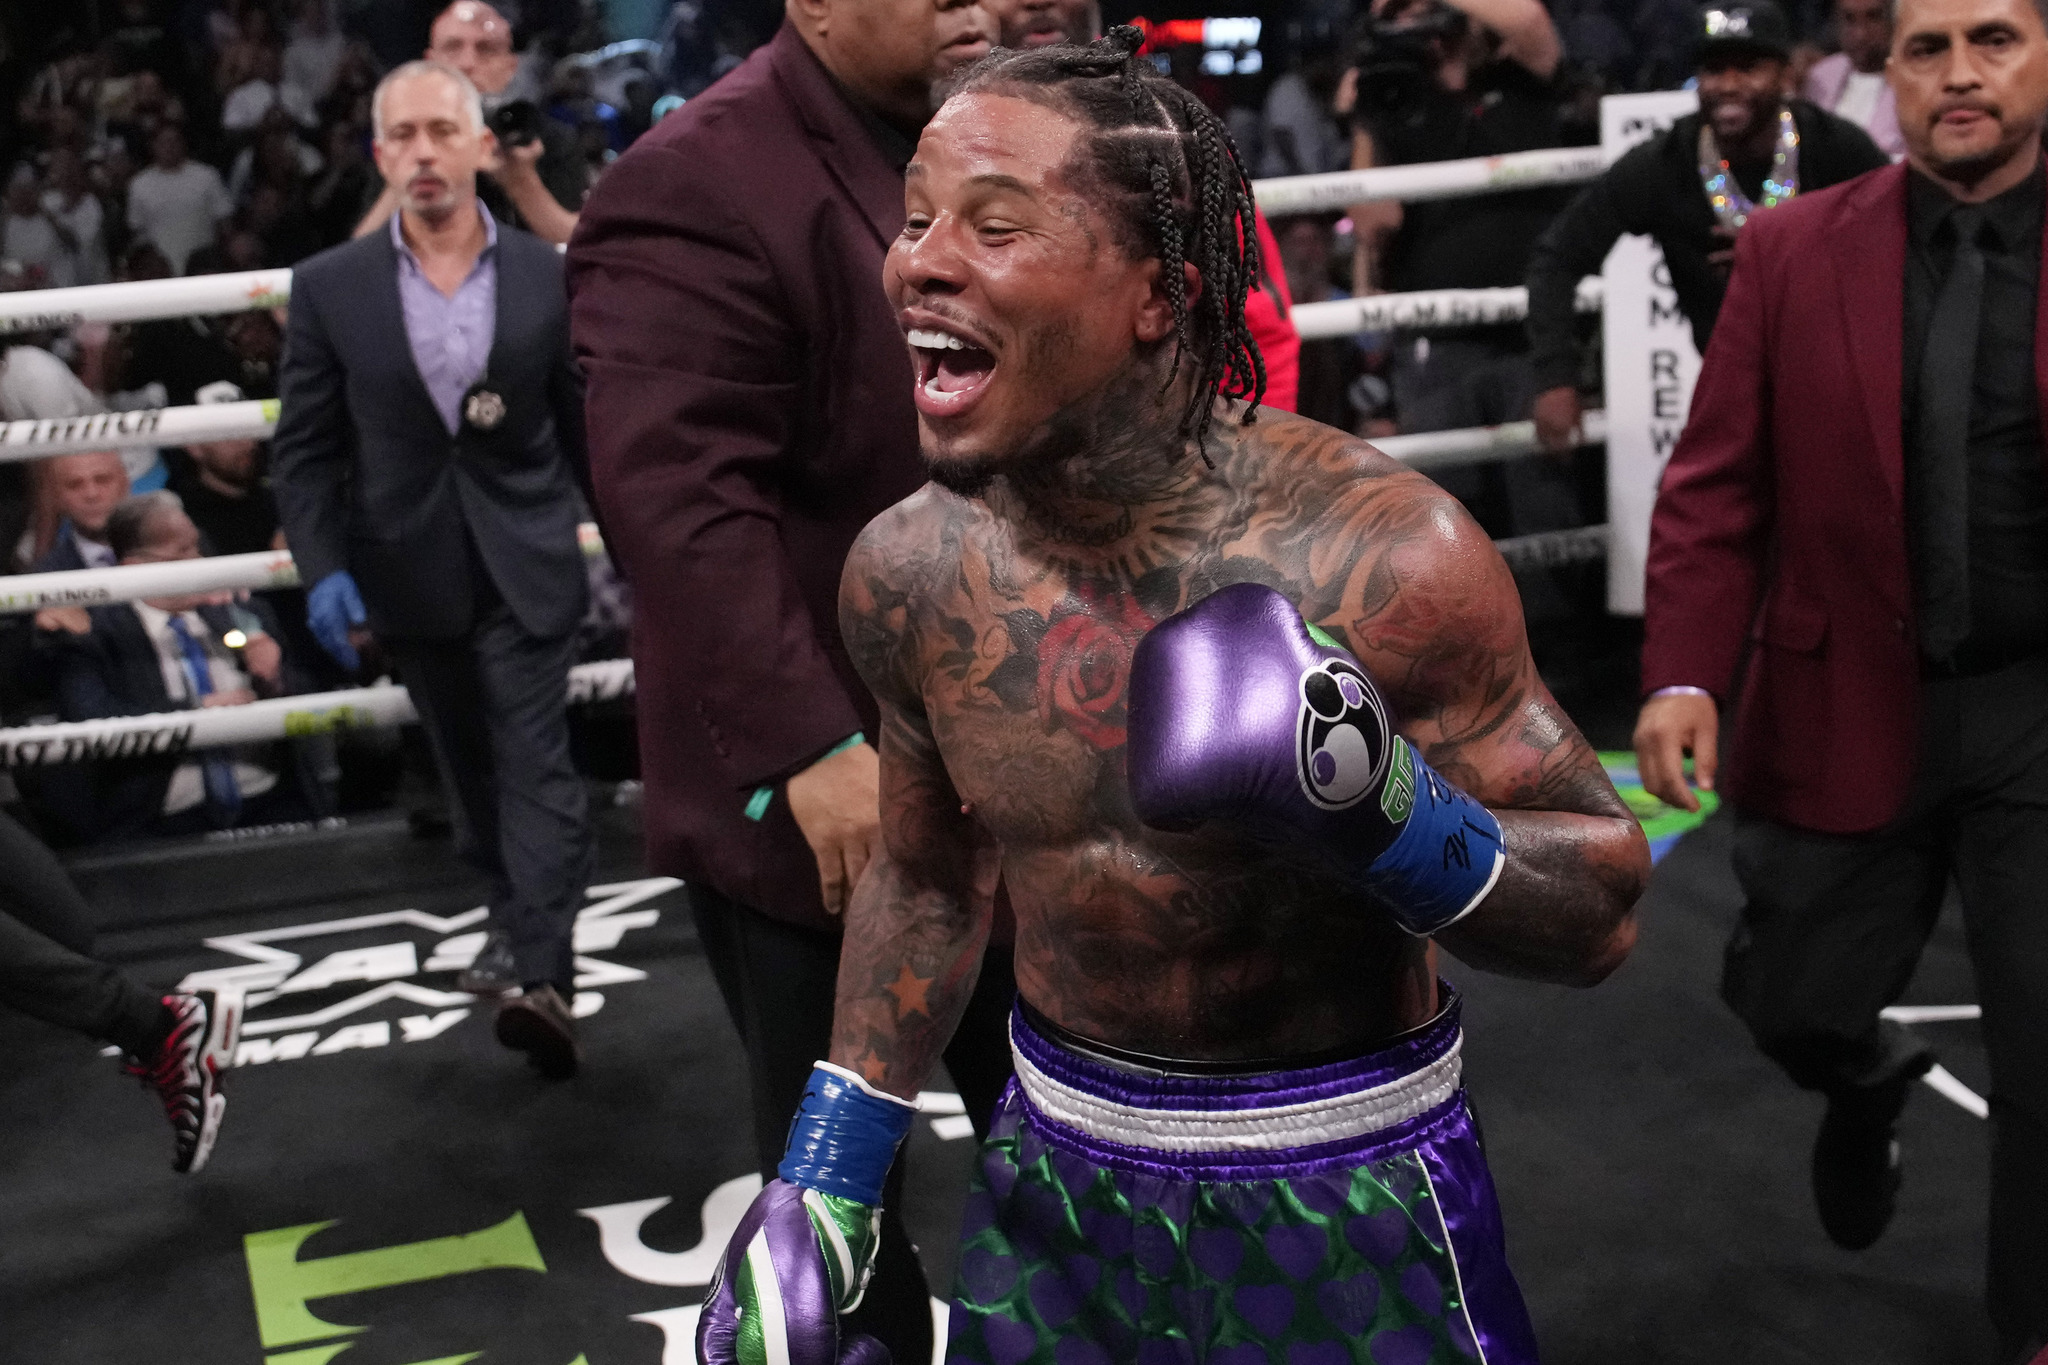 Gervonta Davis next fight: A rematch with Ryan Garcia would be a must-watch event